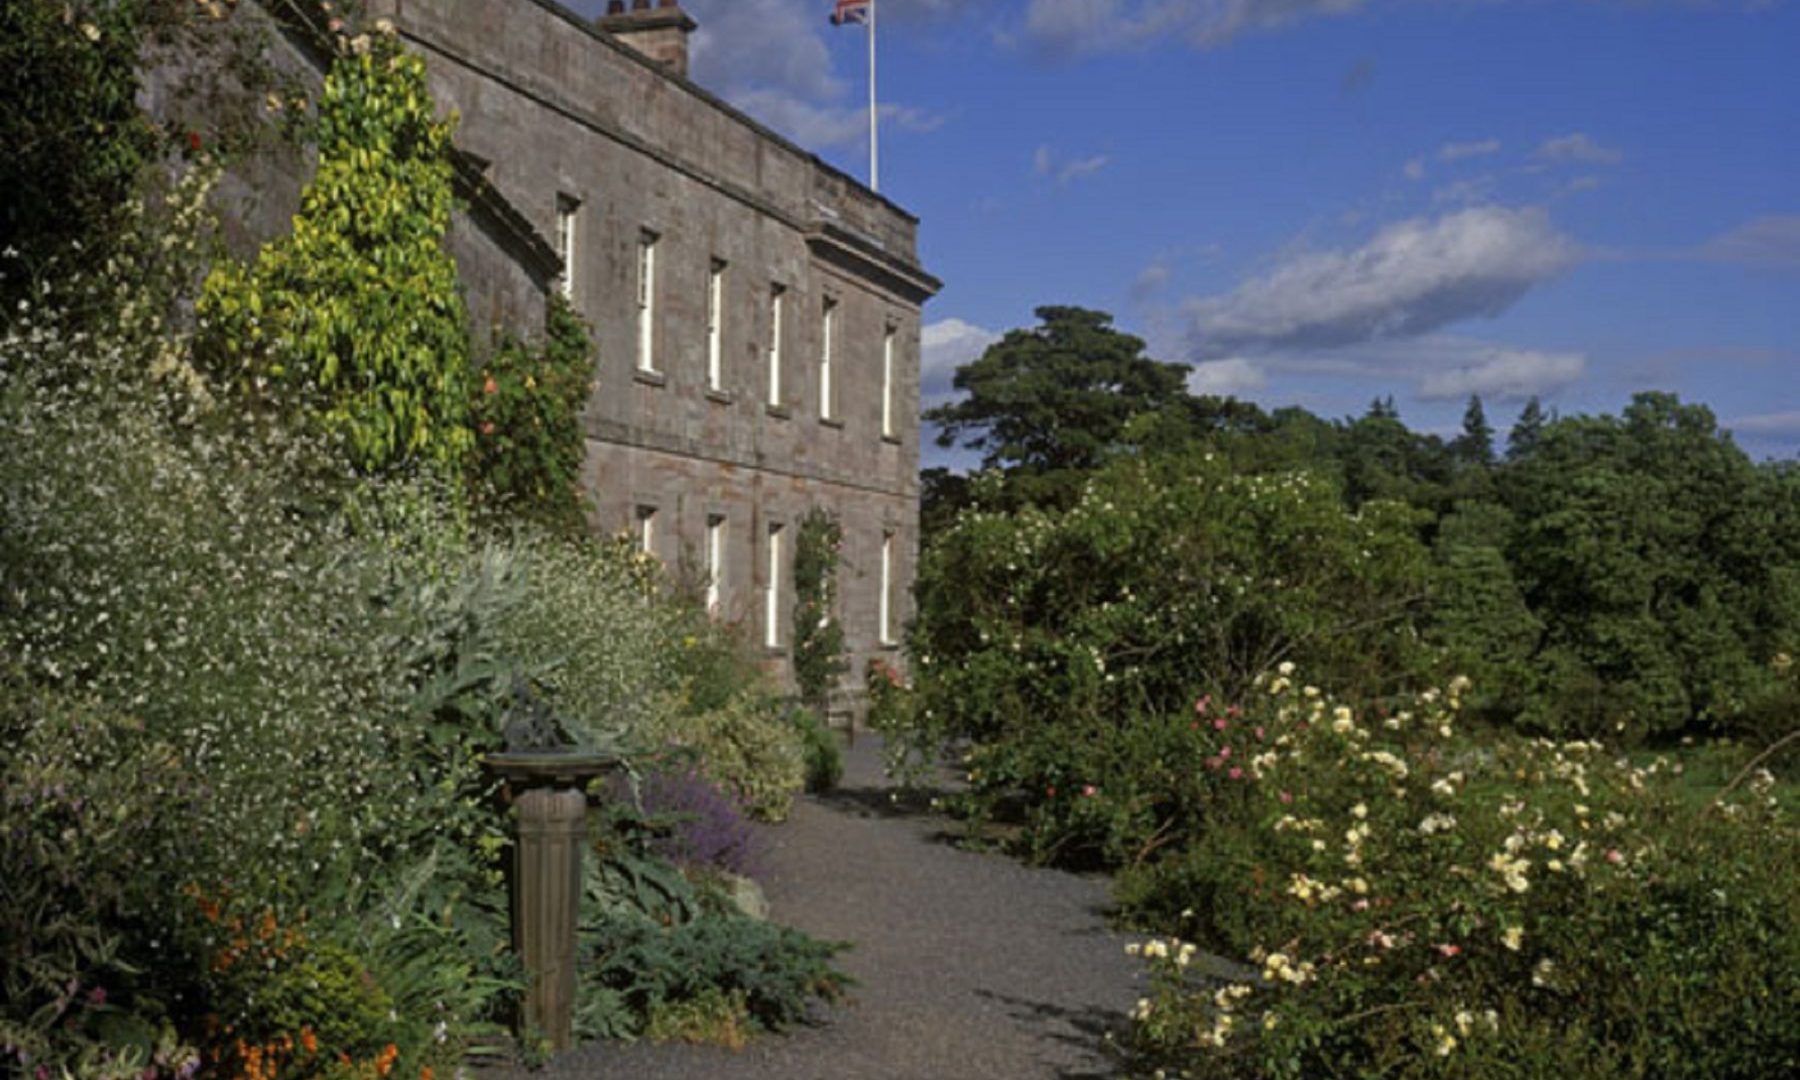 local-historical-attractions-dalemain-gardens-near-ullswater-val